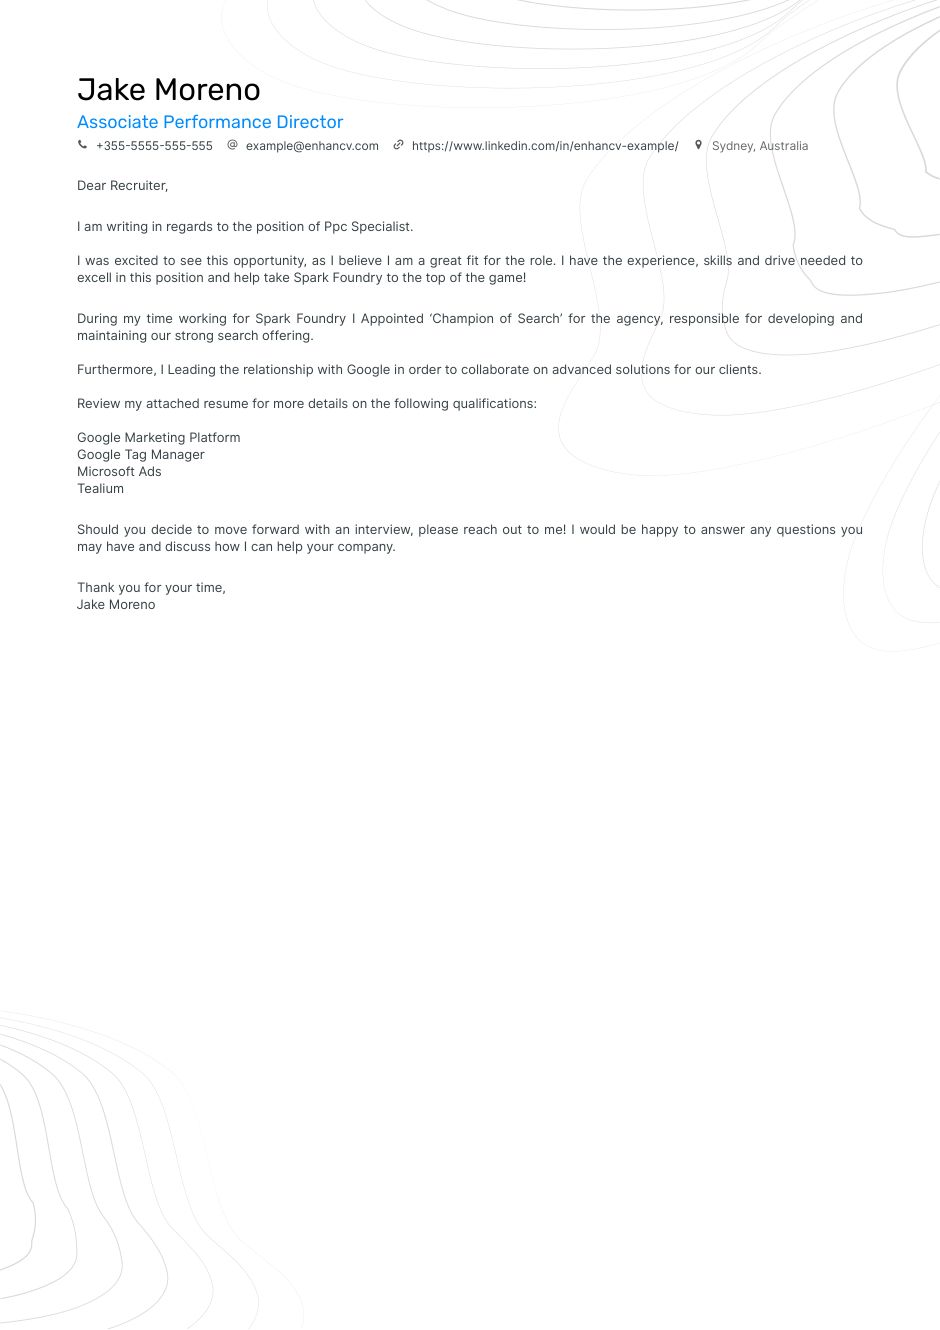 ppc-specialist-coverletter.png